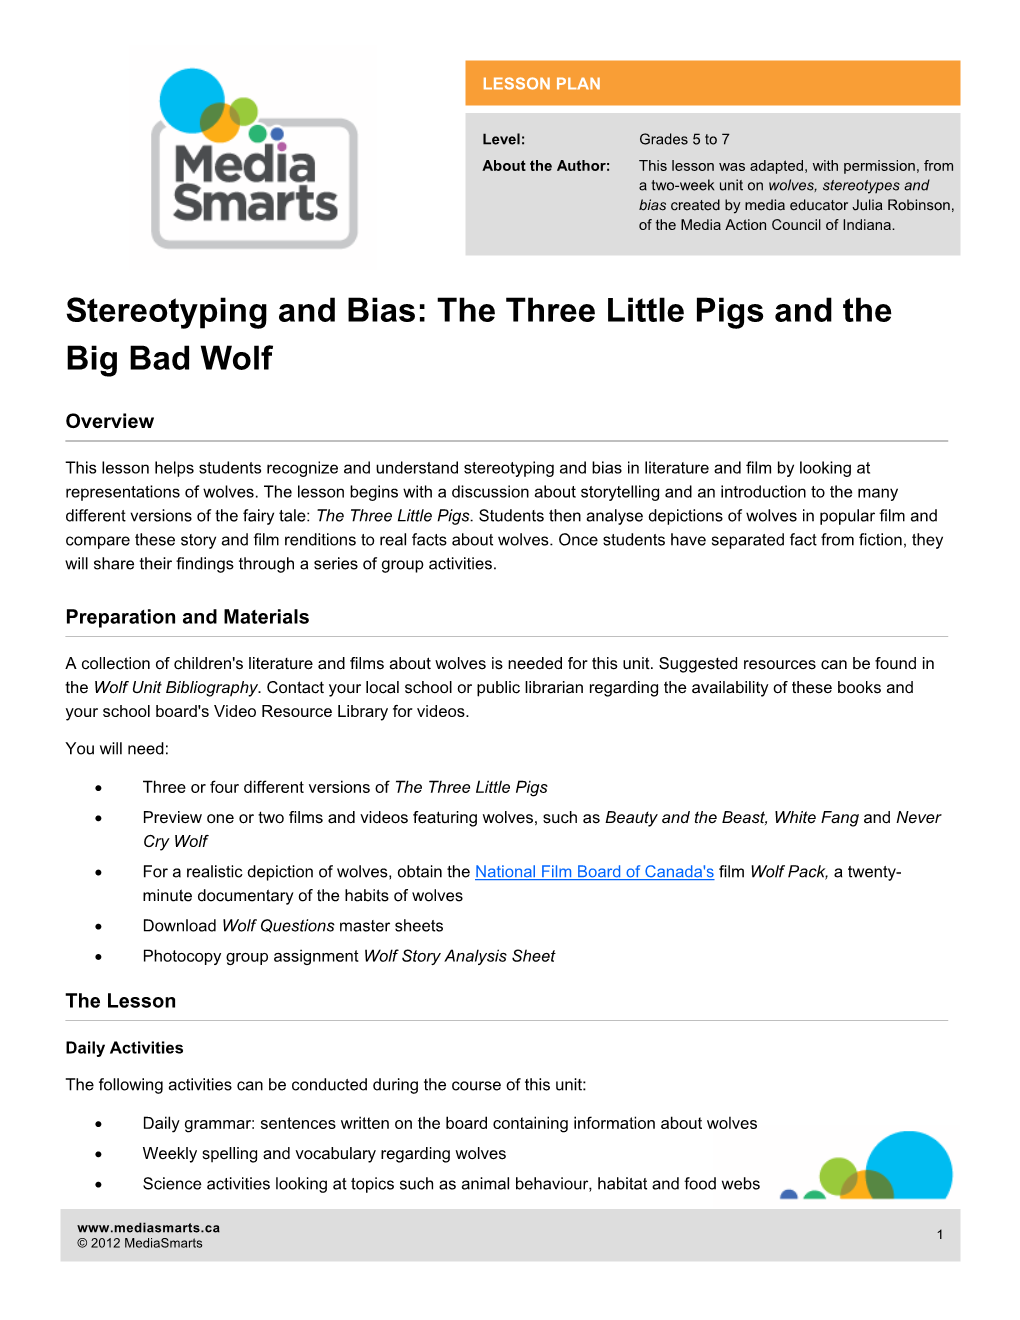 Stereotyping and Bias: the Three Little Pigs and the Big Bad Wolf